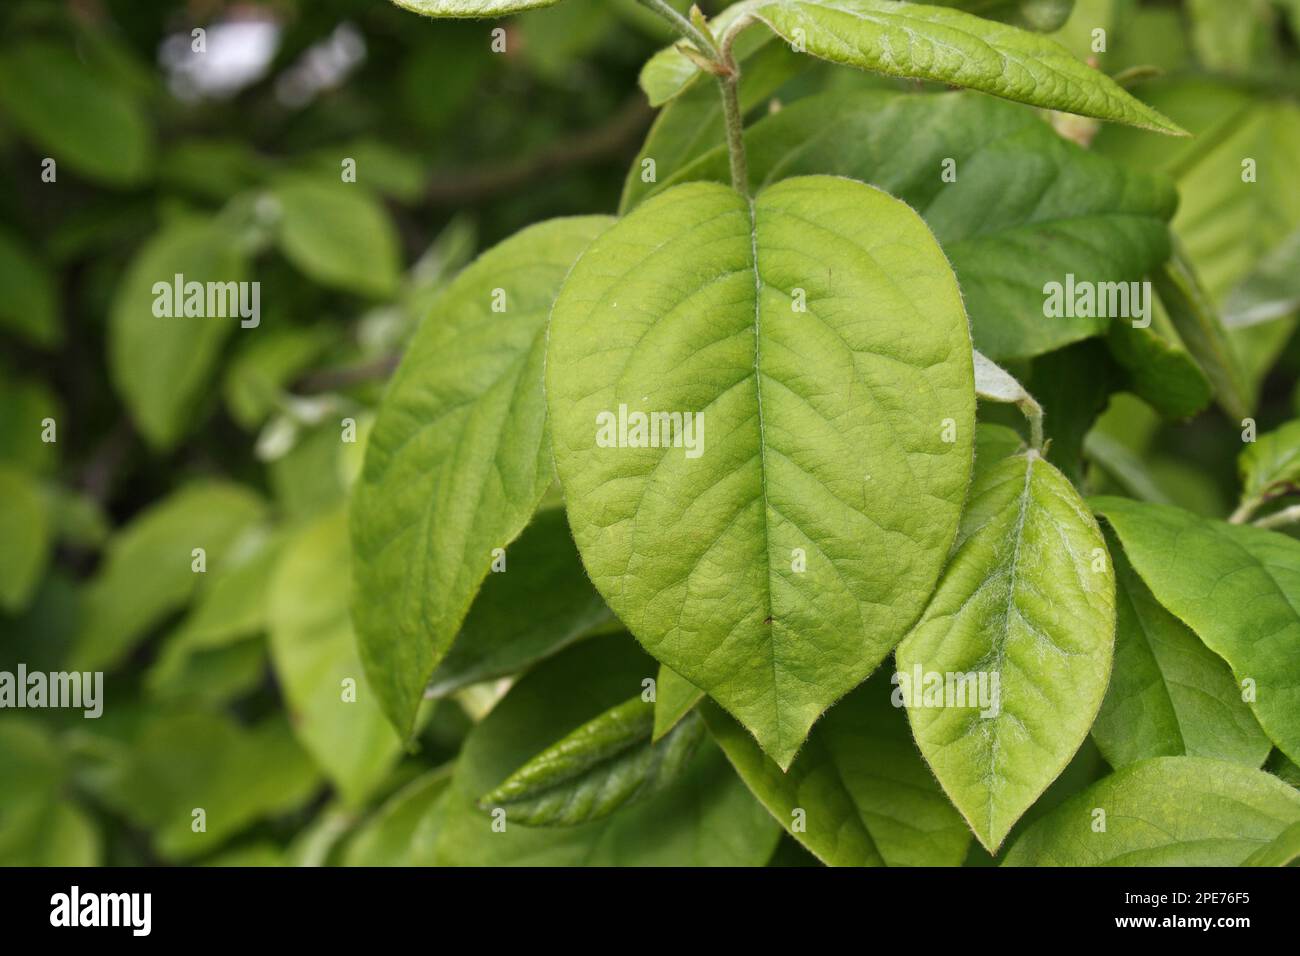 Quince (Cydonia oblonga) close-up of leaves, growing in garden, Mendlesham, Suffolk, England, United Kingdom Stock Photo